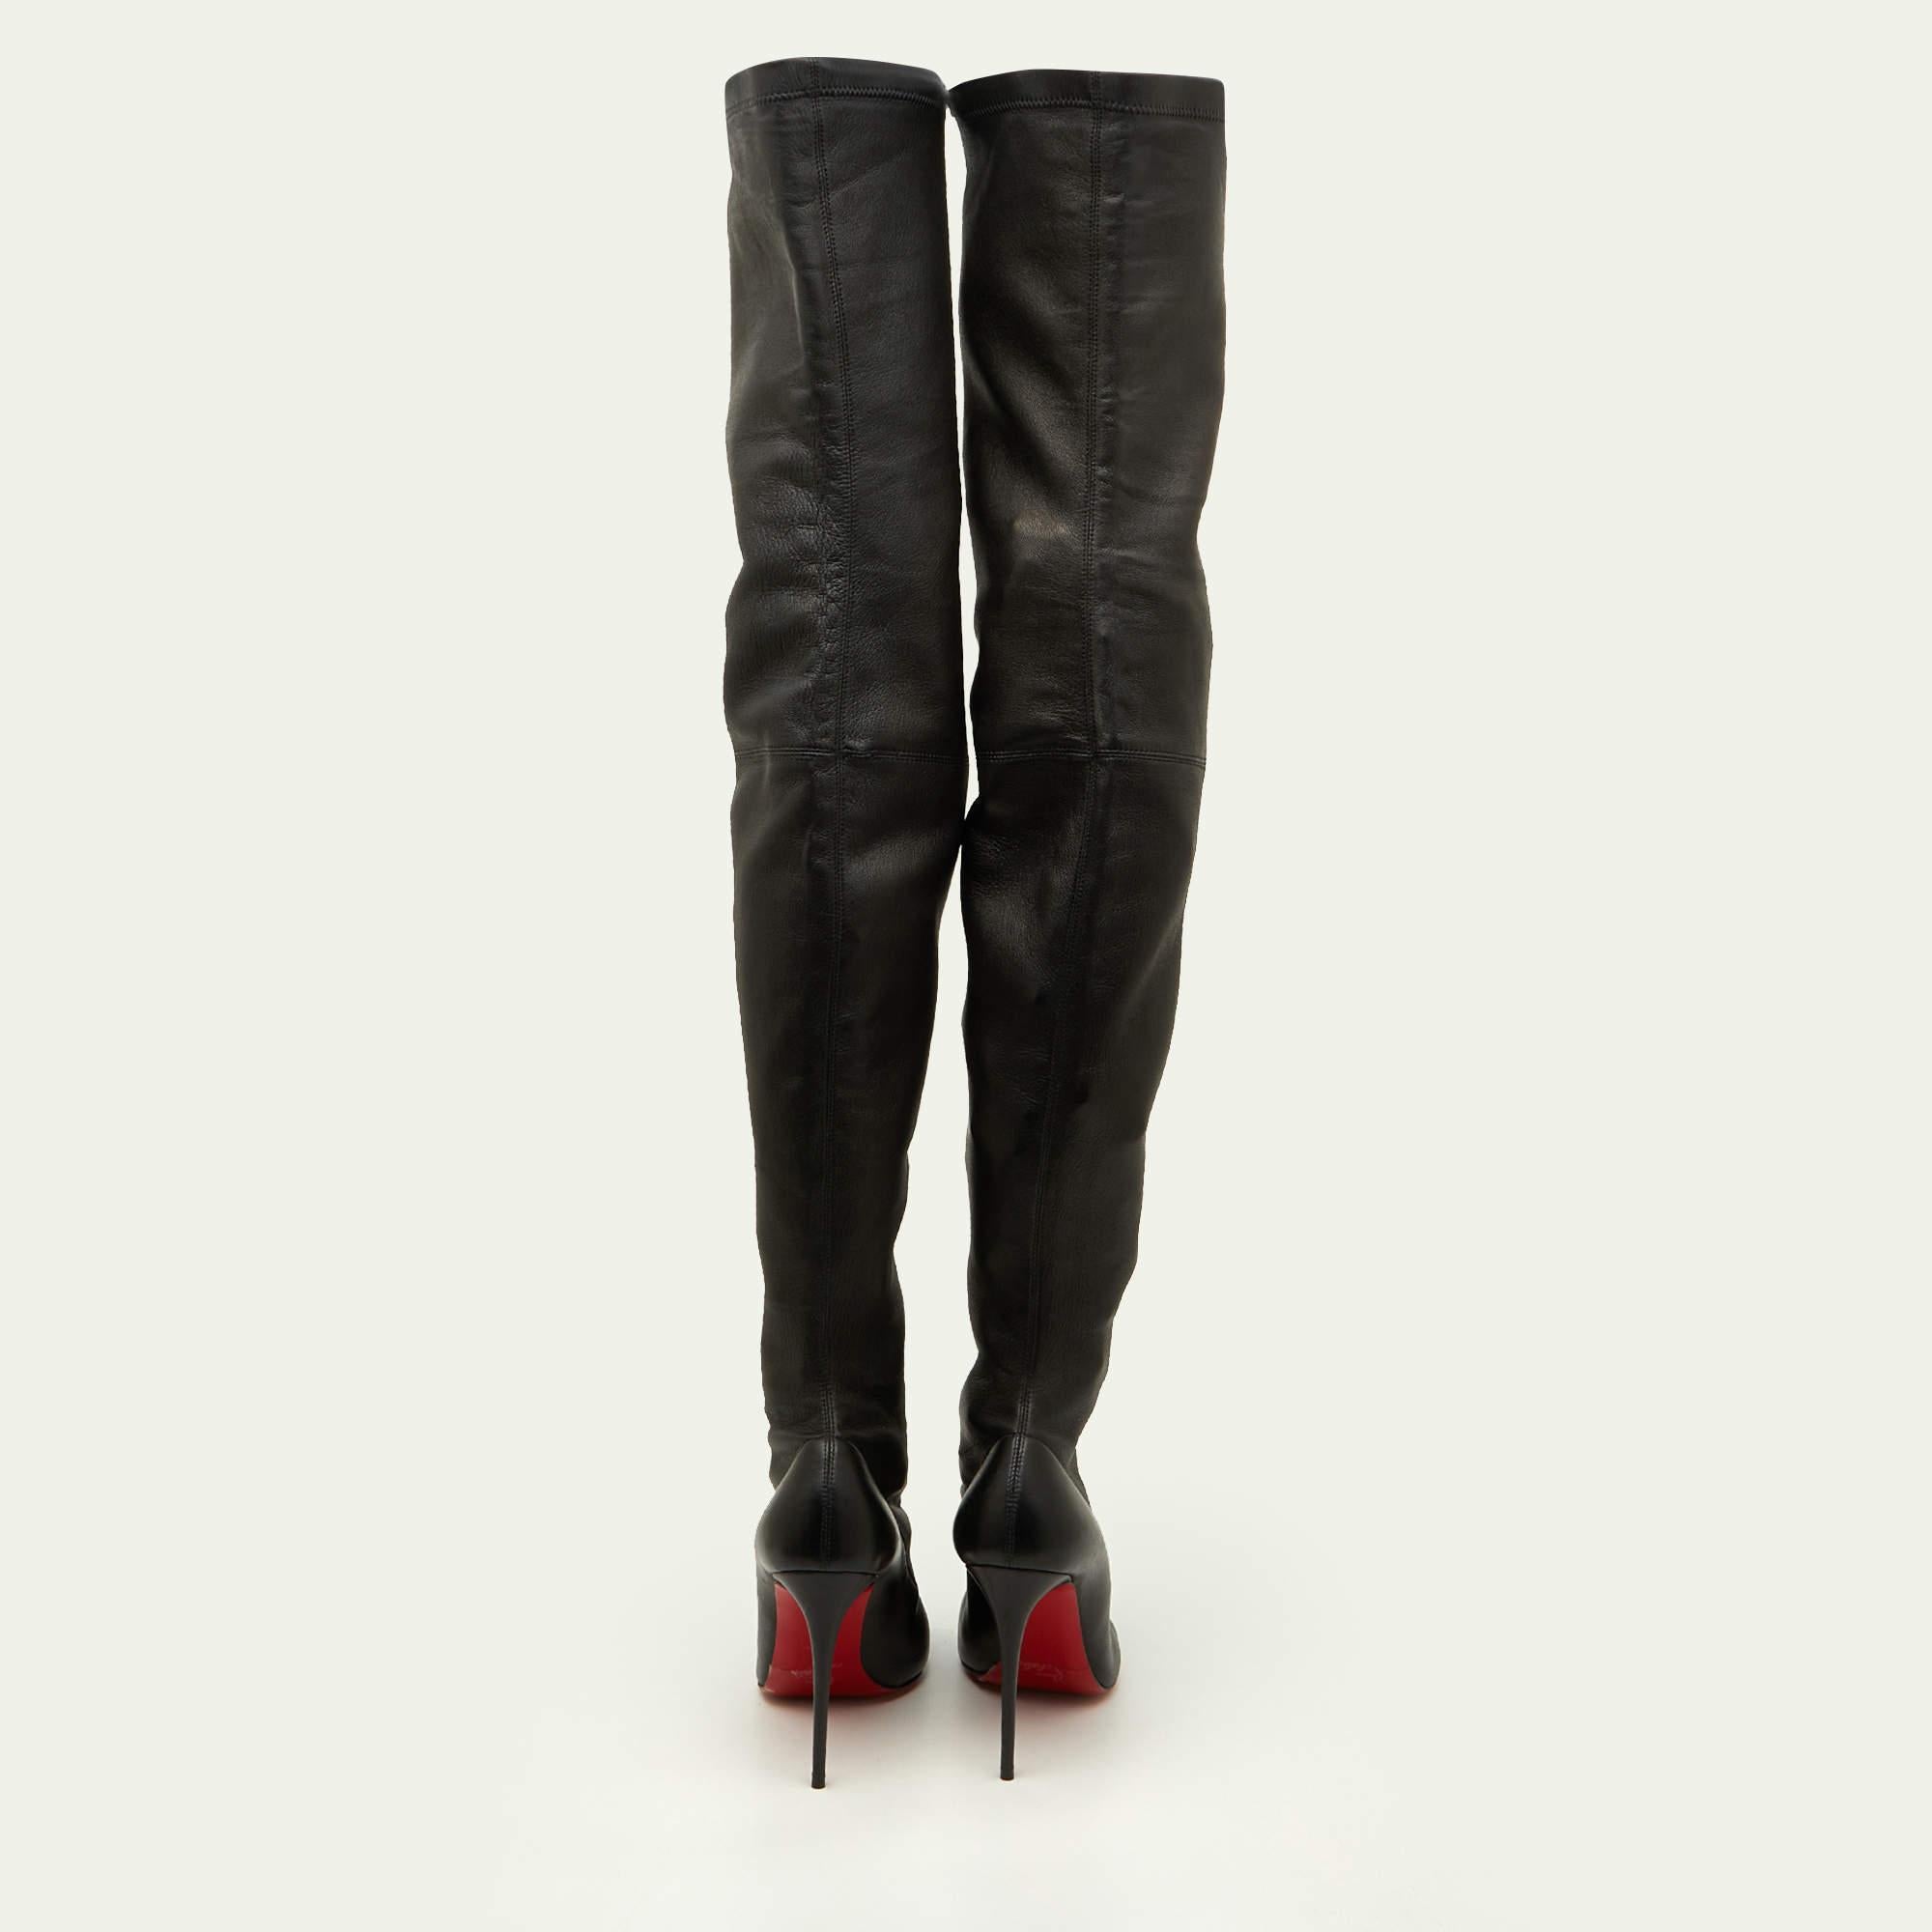 Women's Christian Louboutin Black Leather Thigh High Boots Size 38